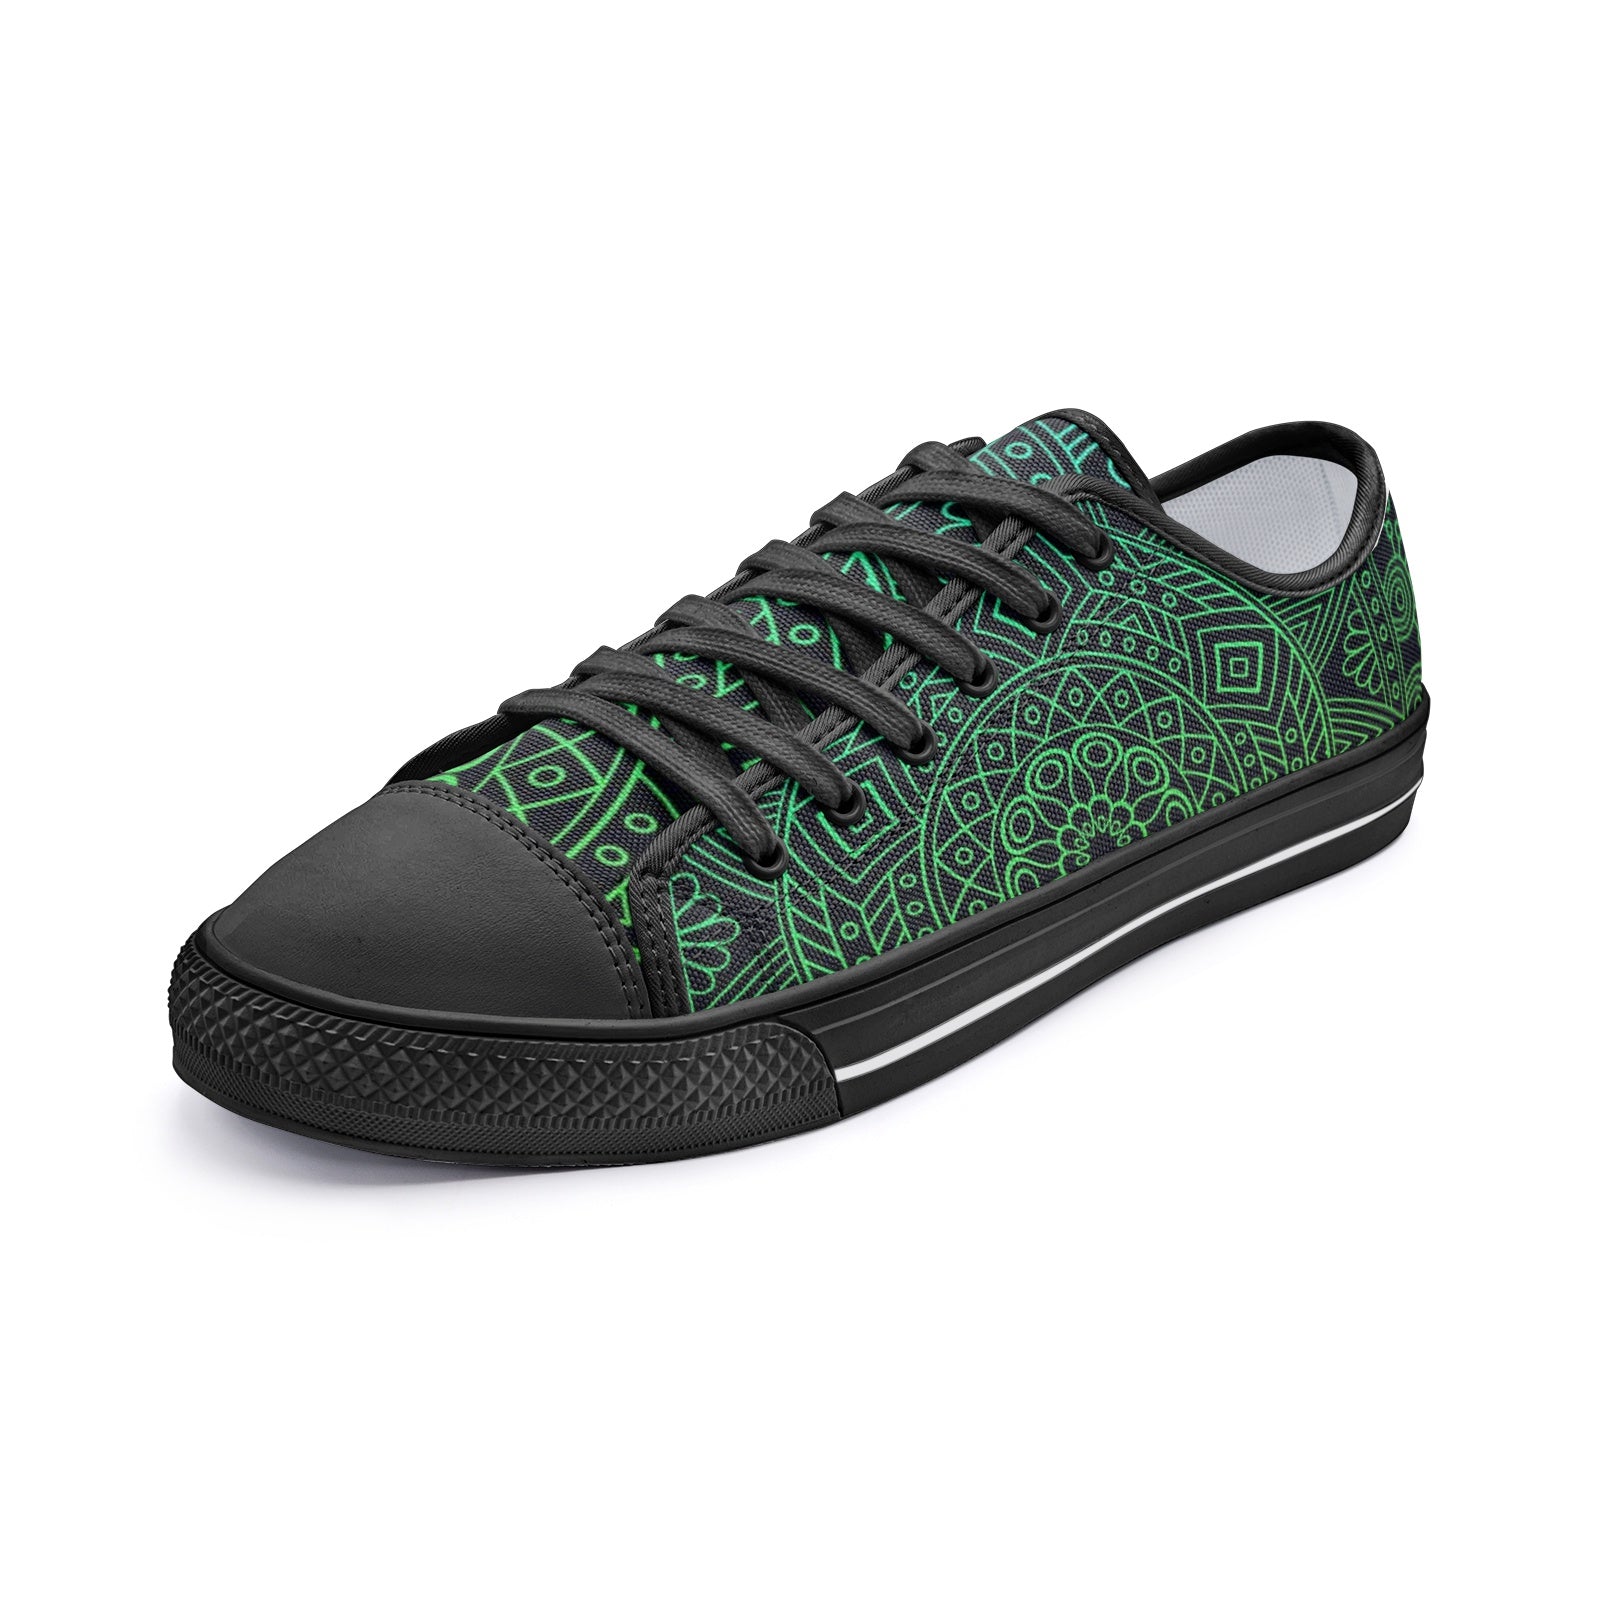 Green Unisex Low Top Canvas Shoes